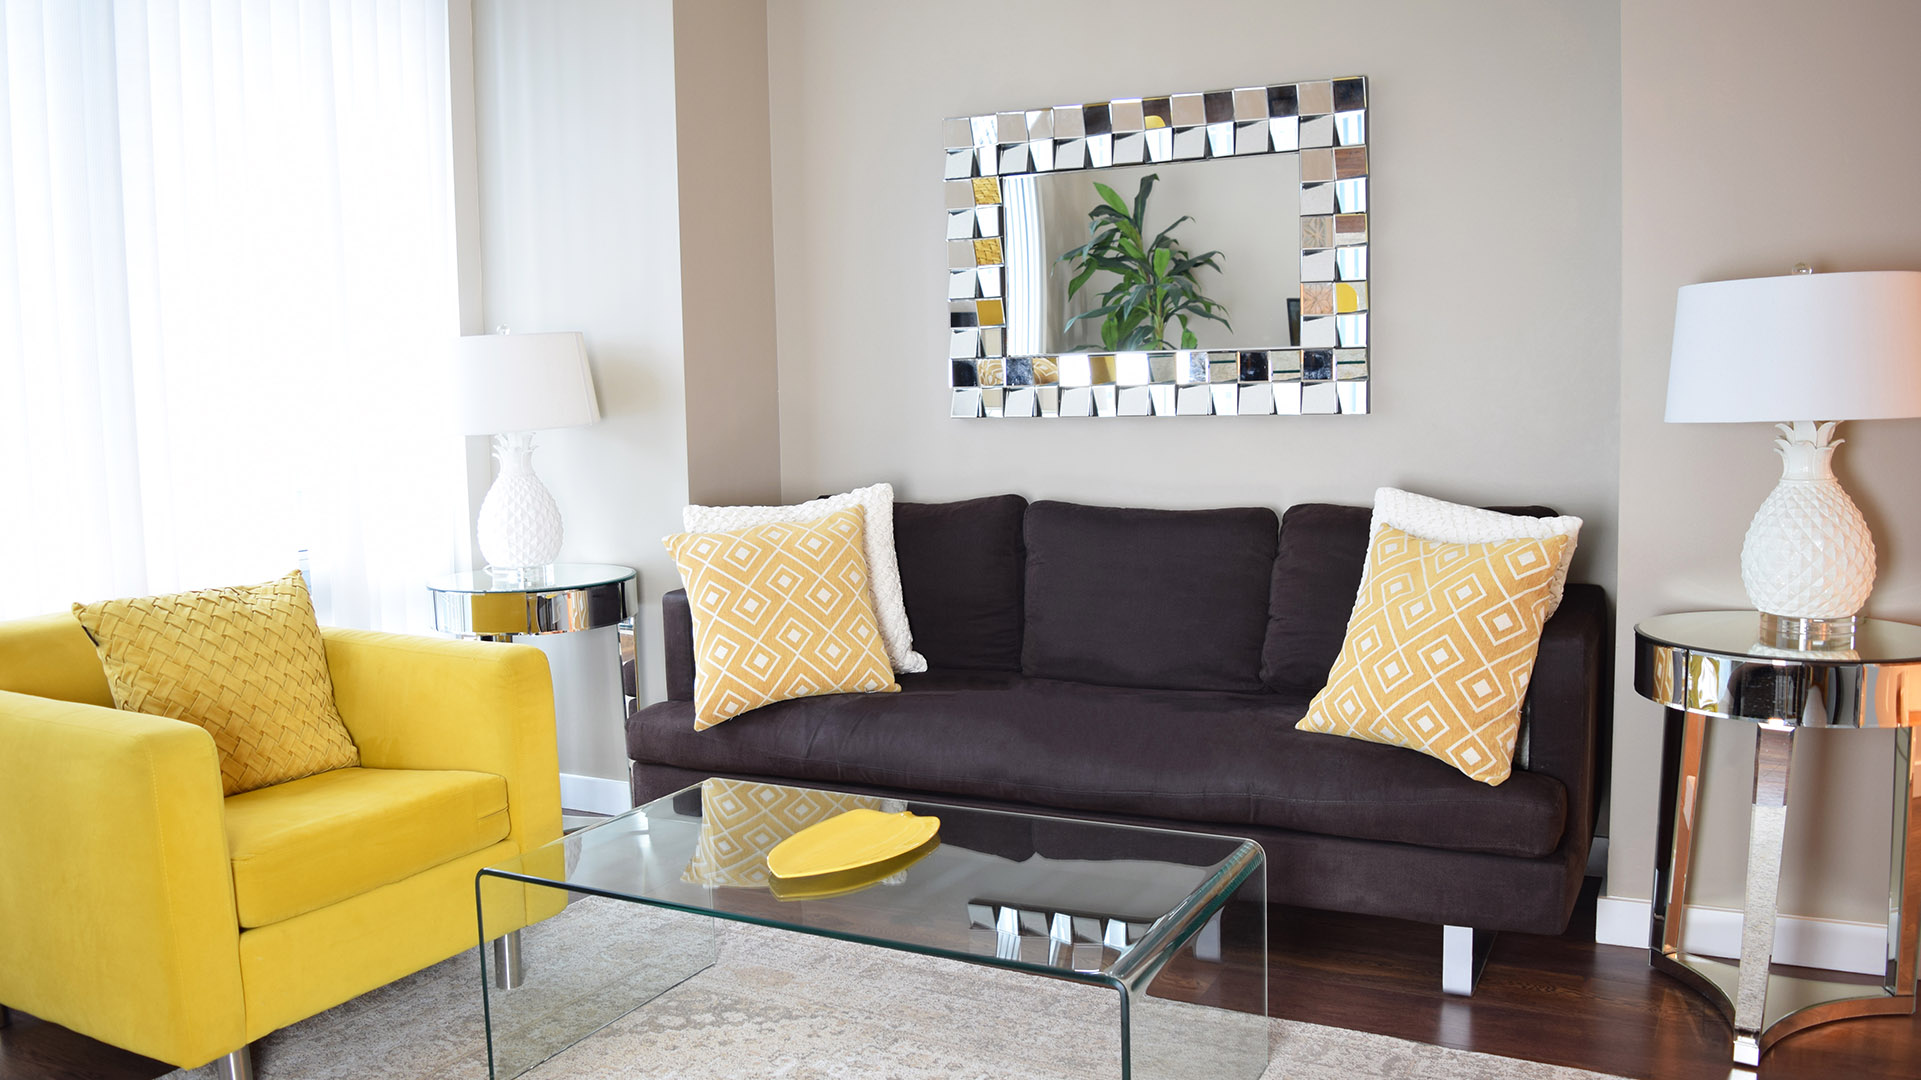 Brown sofa, yellow accent chair, and a wall mirror in the living room of apartment 1003-1288 West Georgia, at the Residences on Georgia.